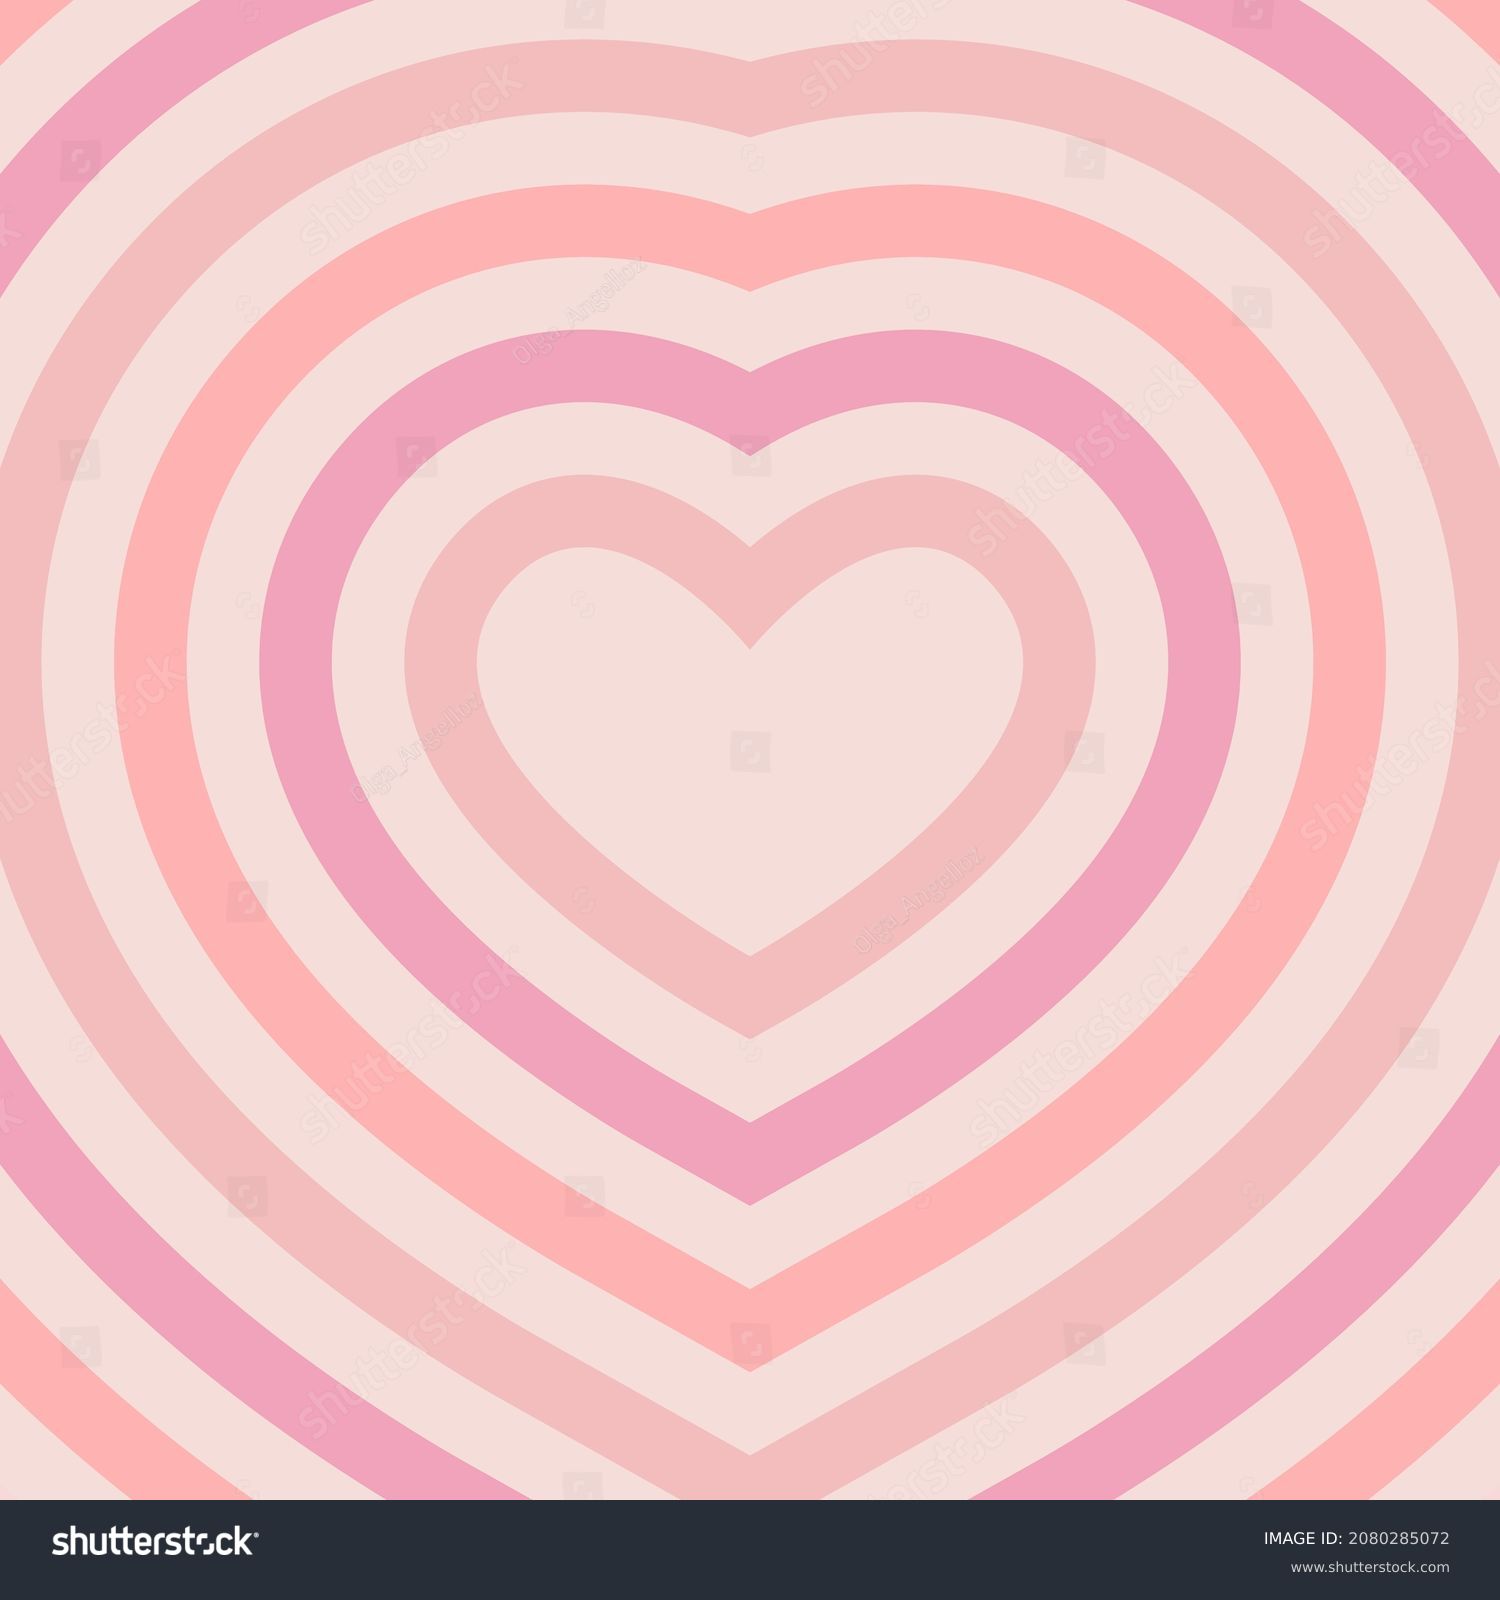 Heartshaped Concentric Stripes Vector Background Girlish Stock Vector ...